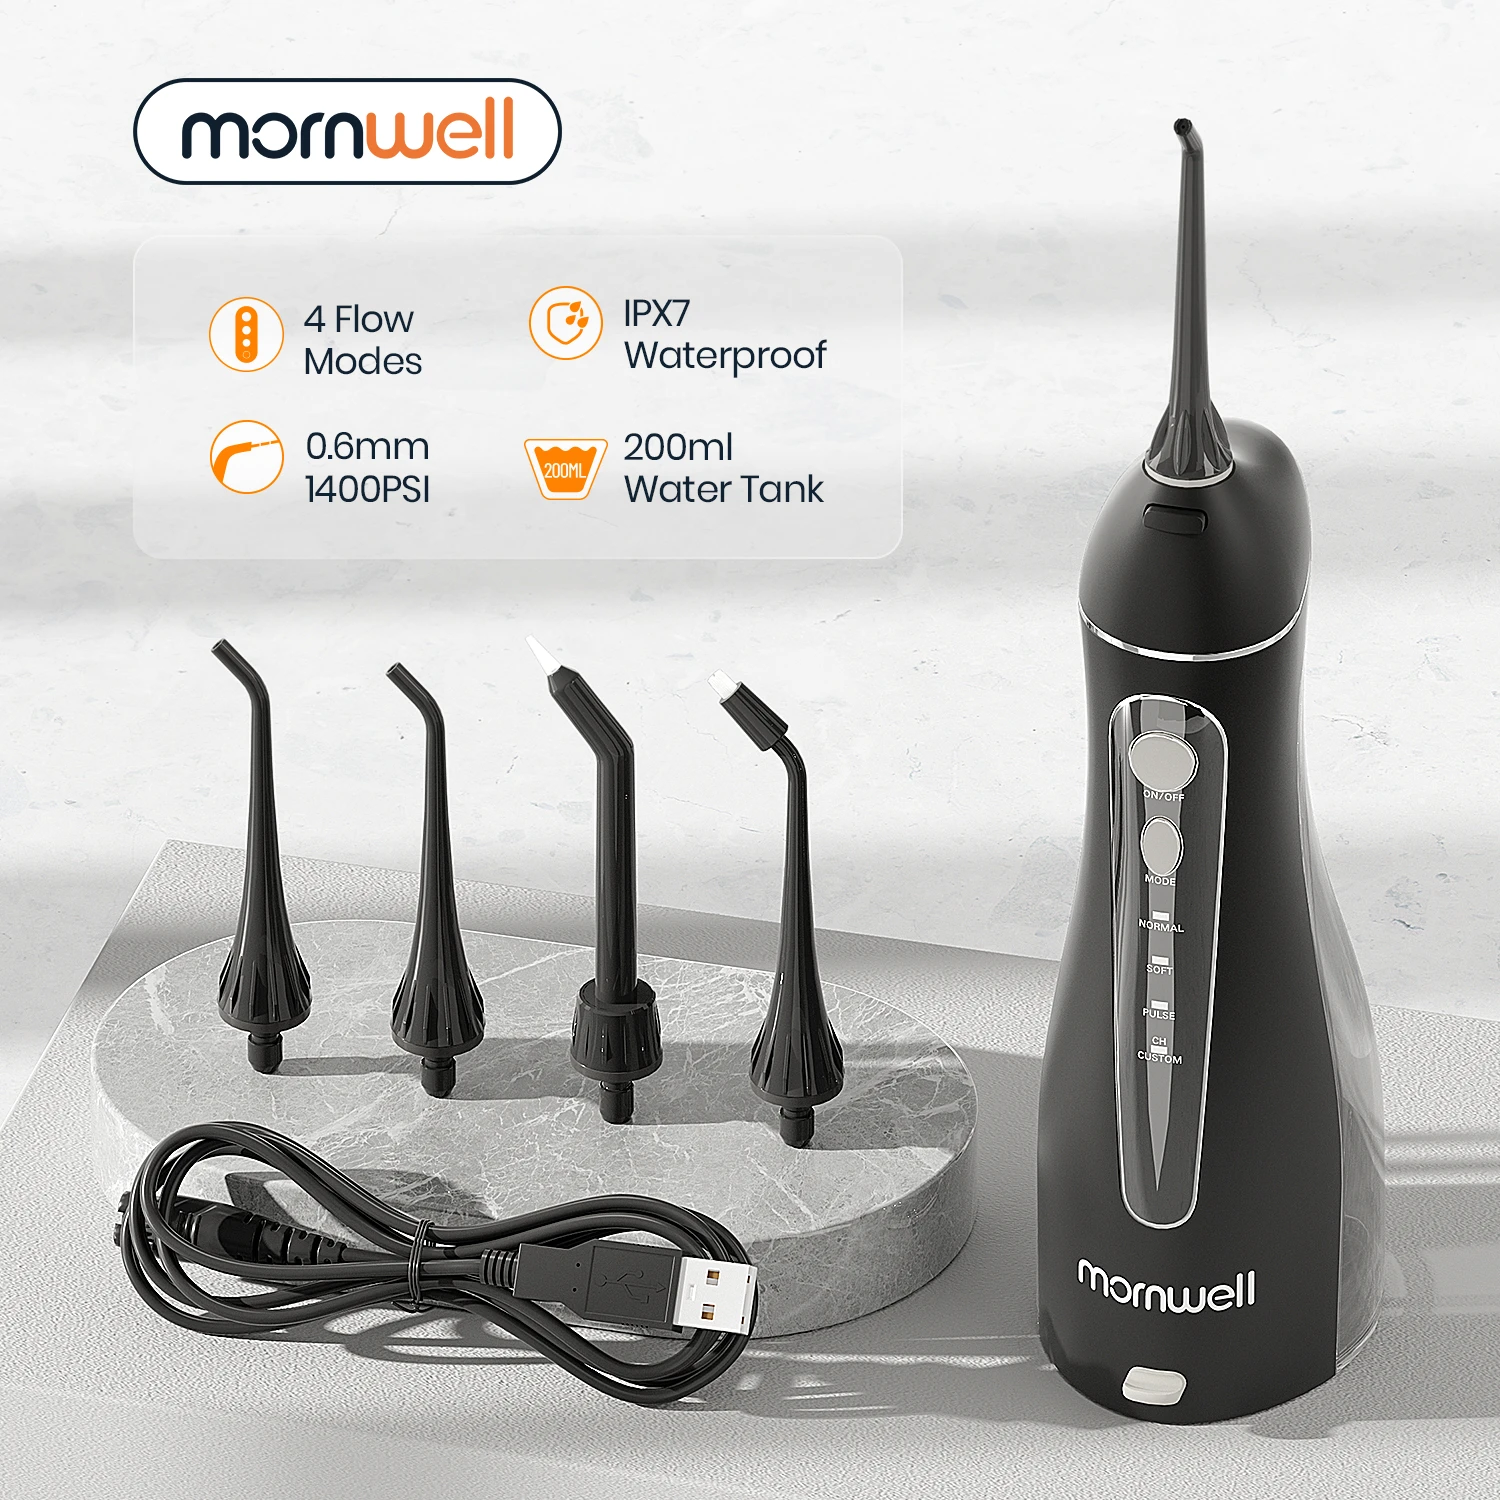 Mornwell Portable Oral Irrigator With Travel Bag Water Flosser USB Rechargeable 5 Nozzles Water Jet 200ml Water Tank Waterproof